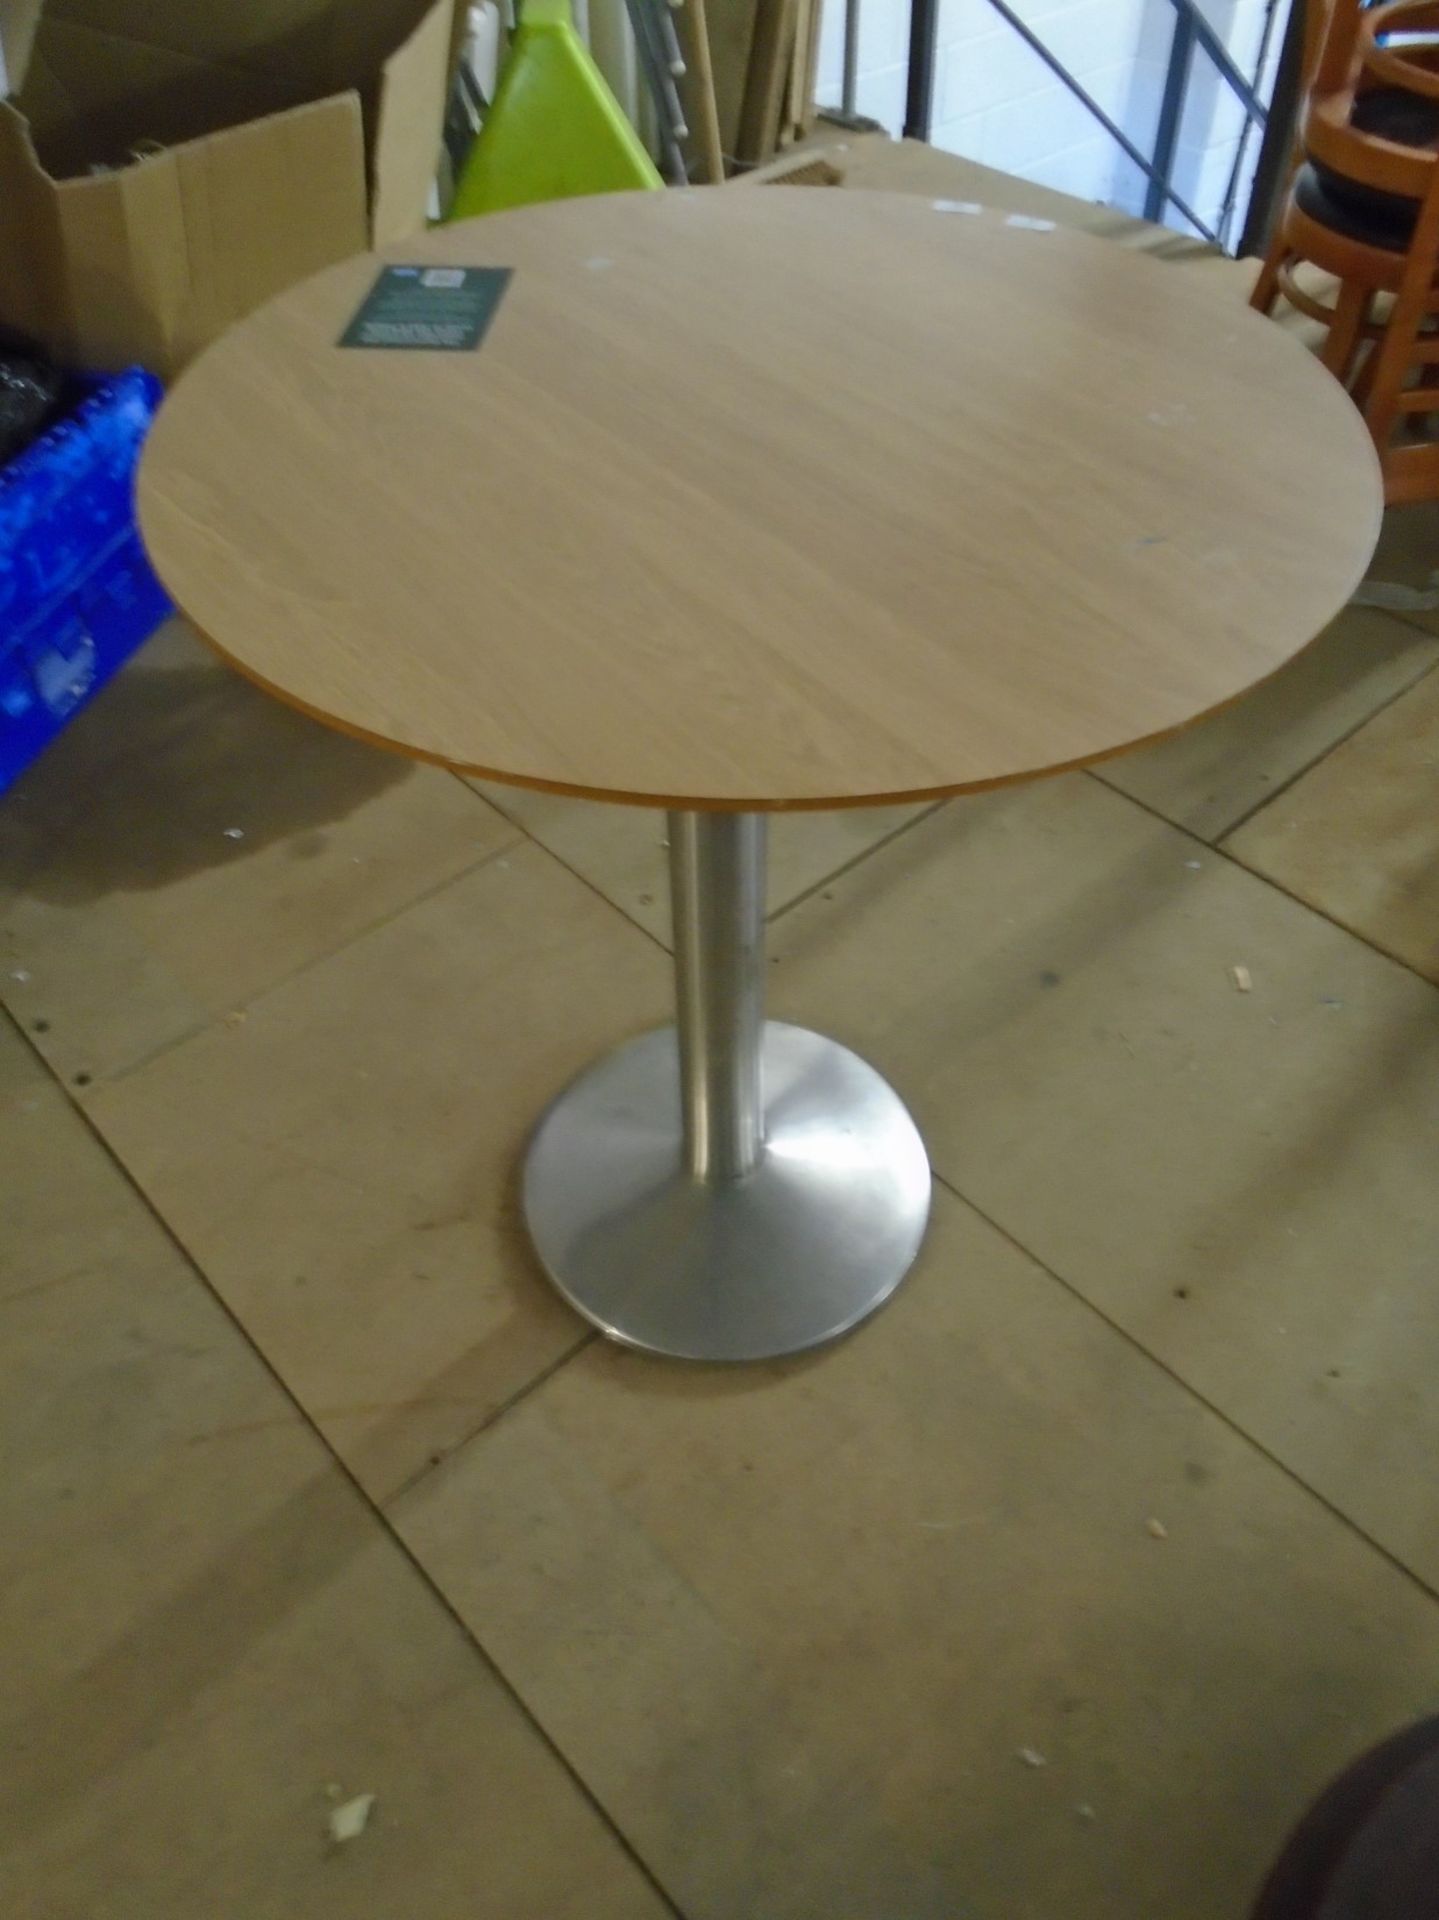 * 4 x S/S pedestal base table with 800 diameter round tops - beech effect